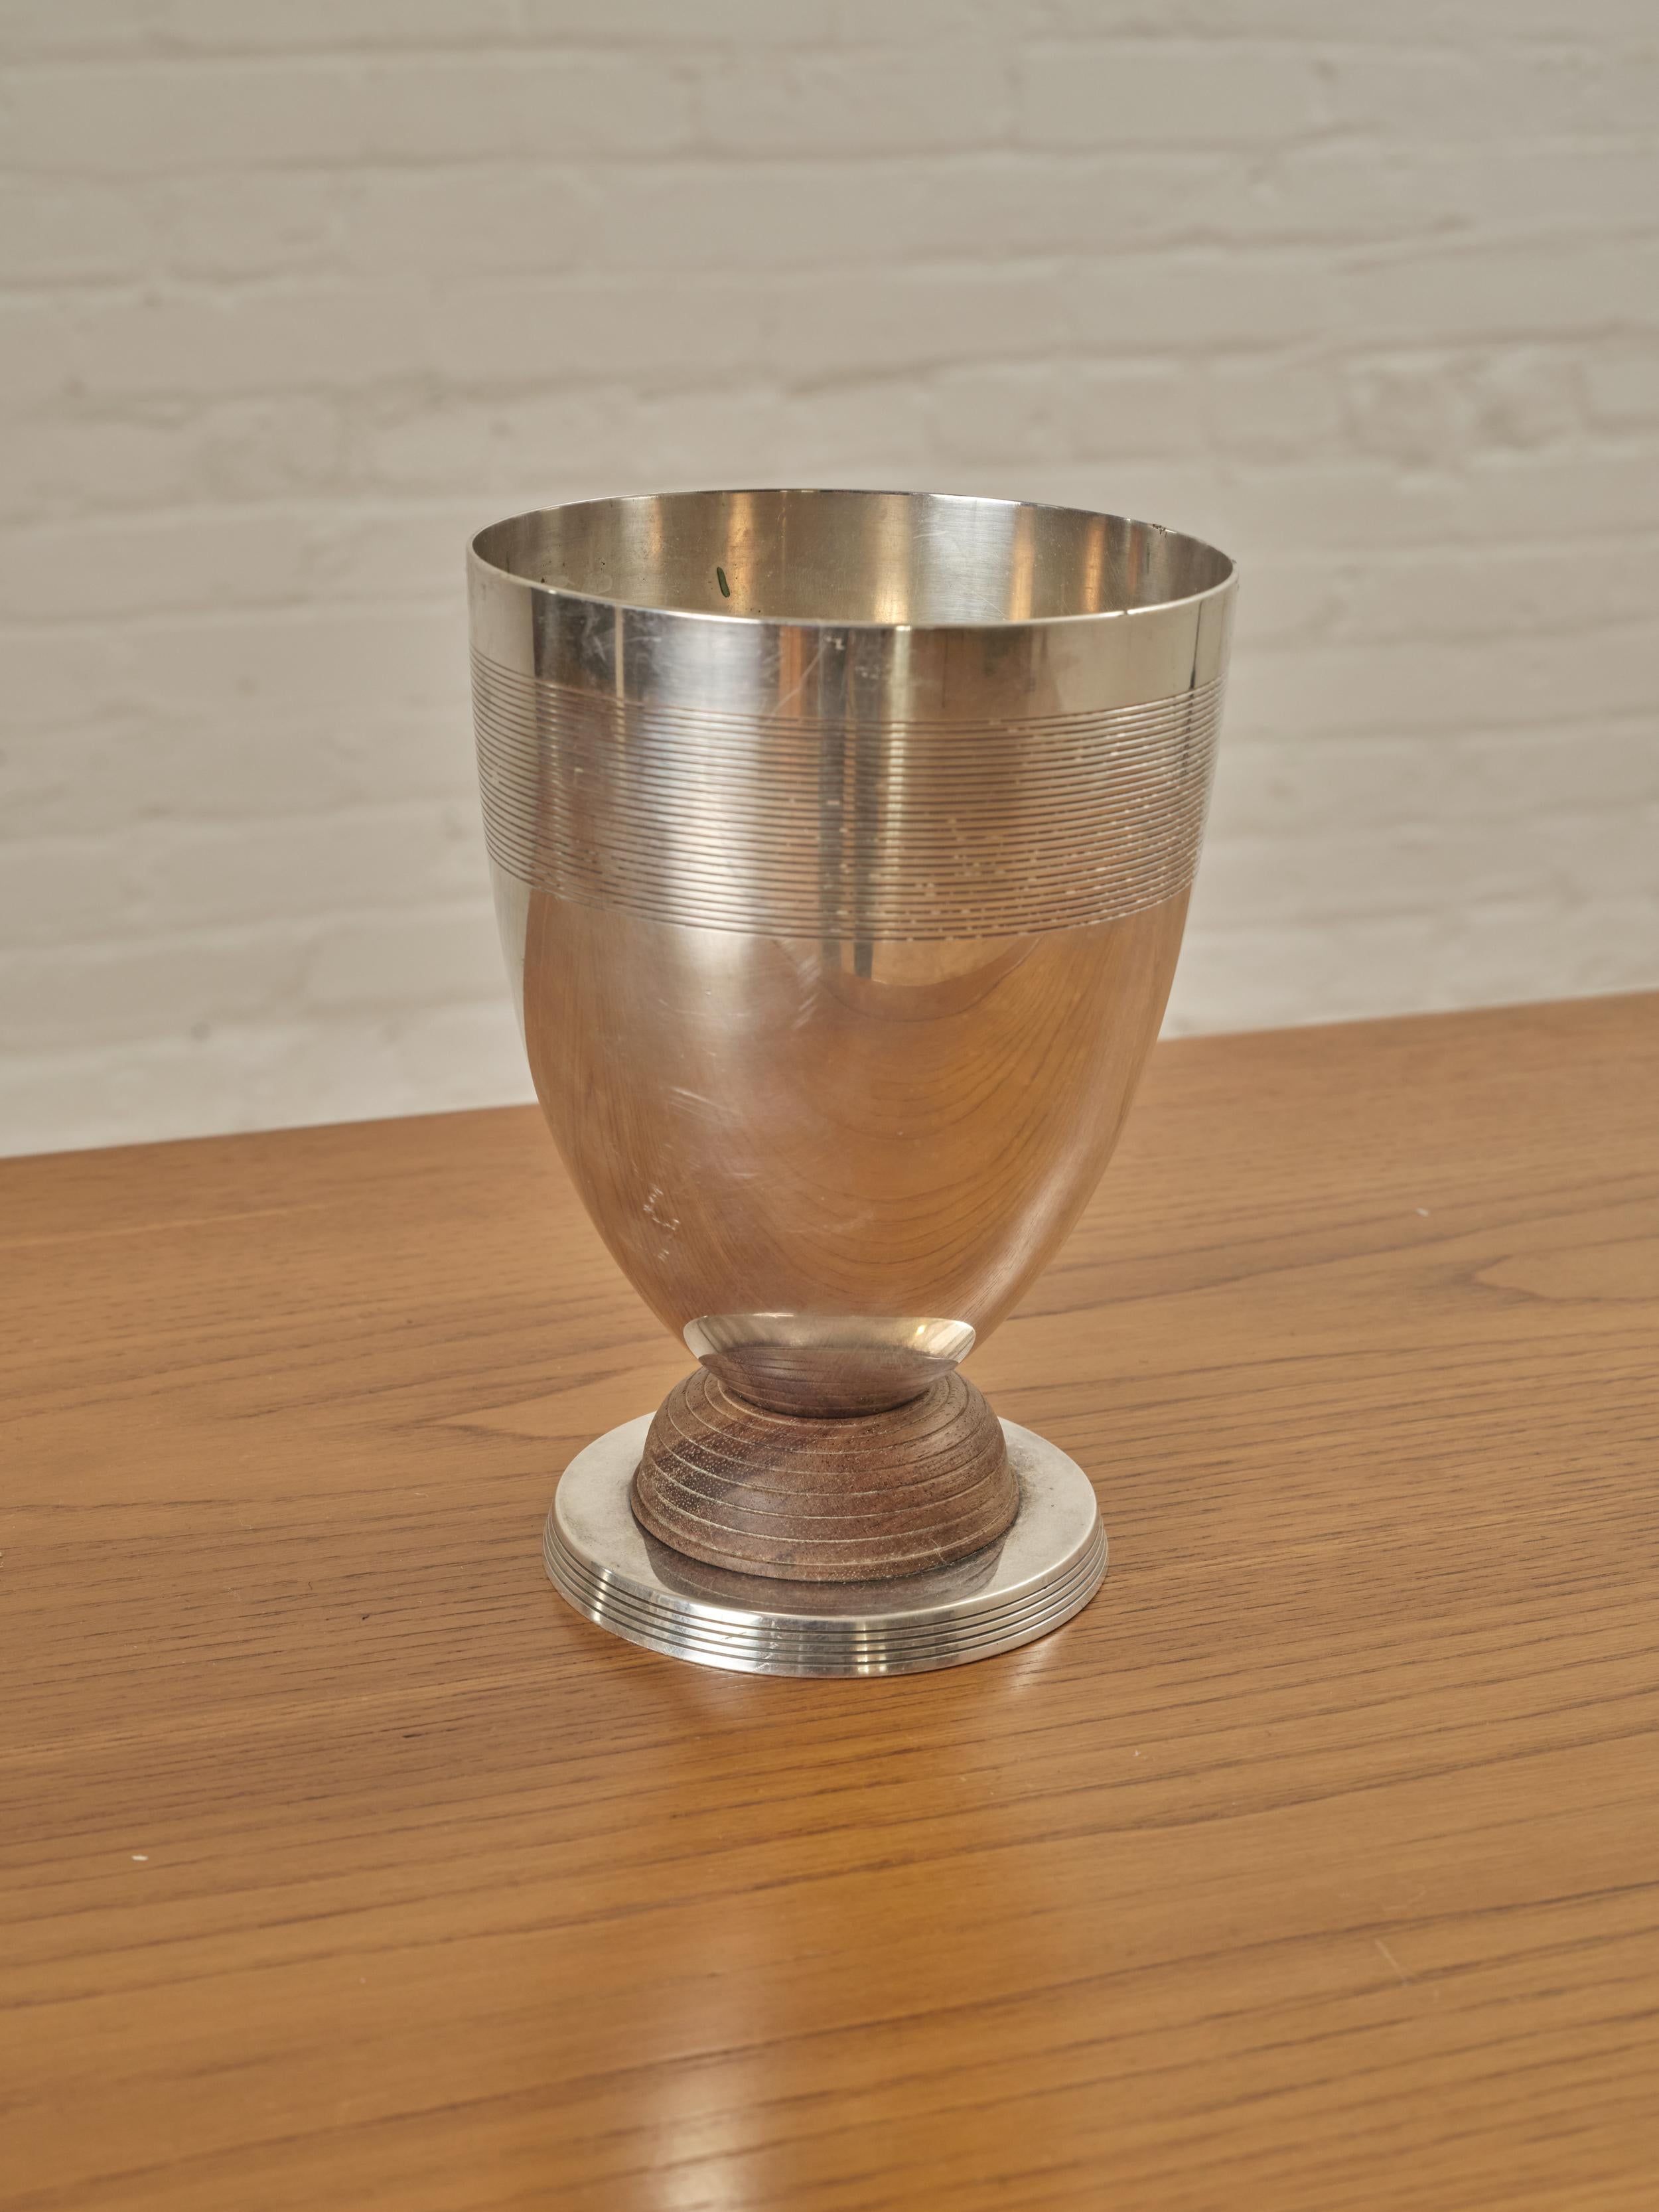 Silver Plated Vase by Luc Lanel for Christofle with a wooden base. Marked on the underside. 

About Luc Lanel:

The designer and ceramist had received his training at the École des arts décoratifs in Paris. He worked mainly with silver or